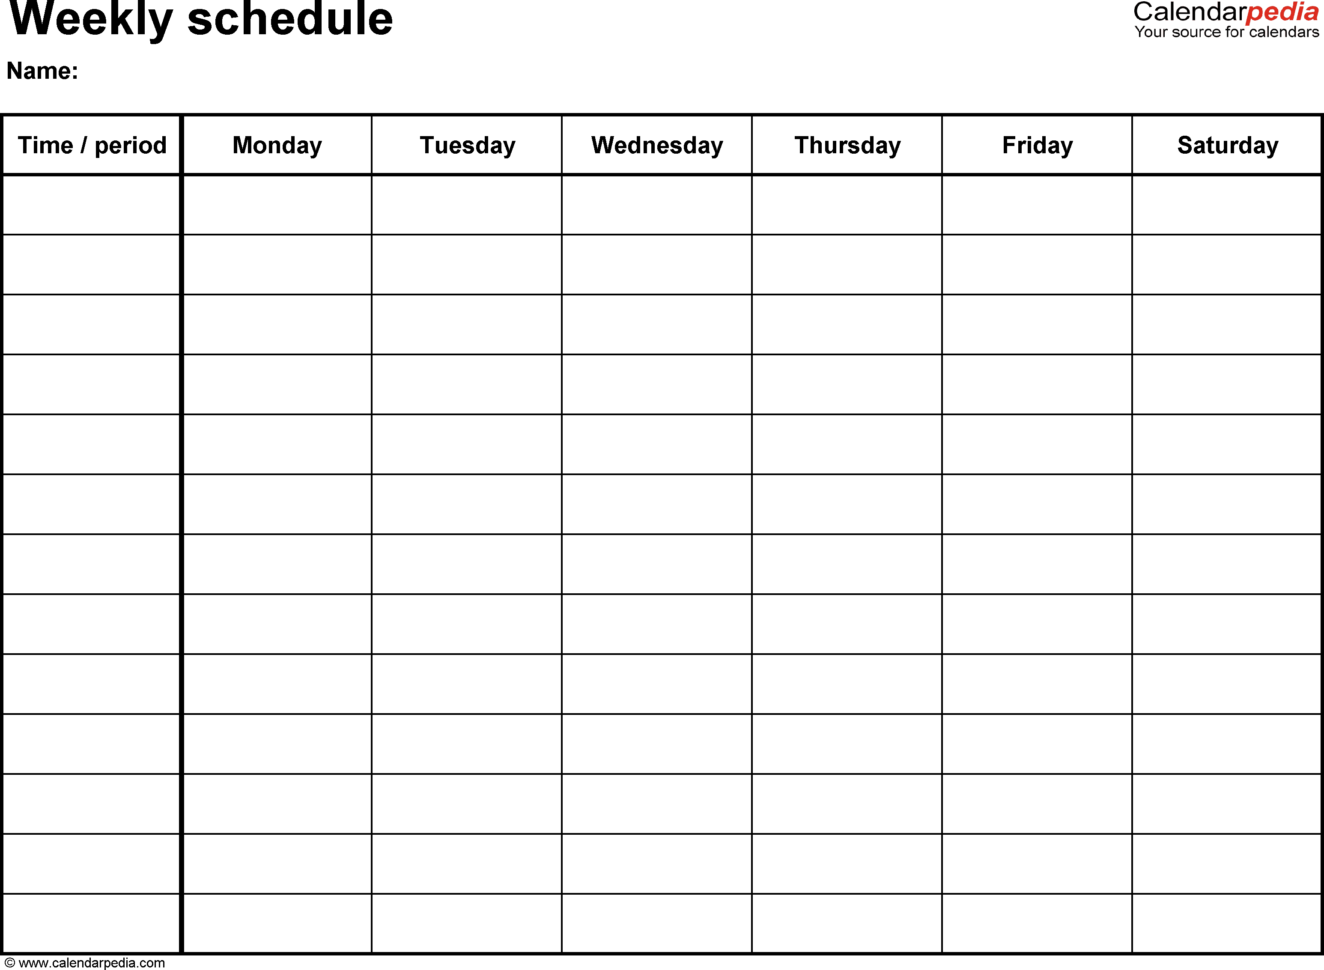 printable-weekly-calendar-with-time-slots-2019-printable-word-searches